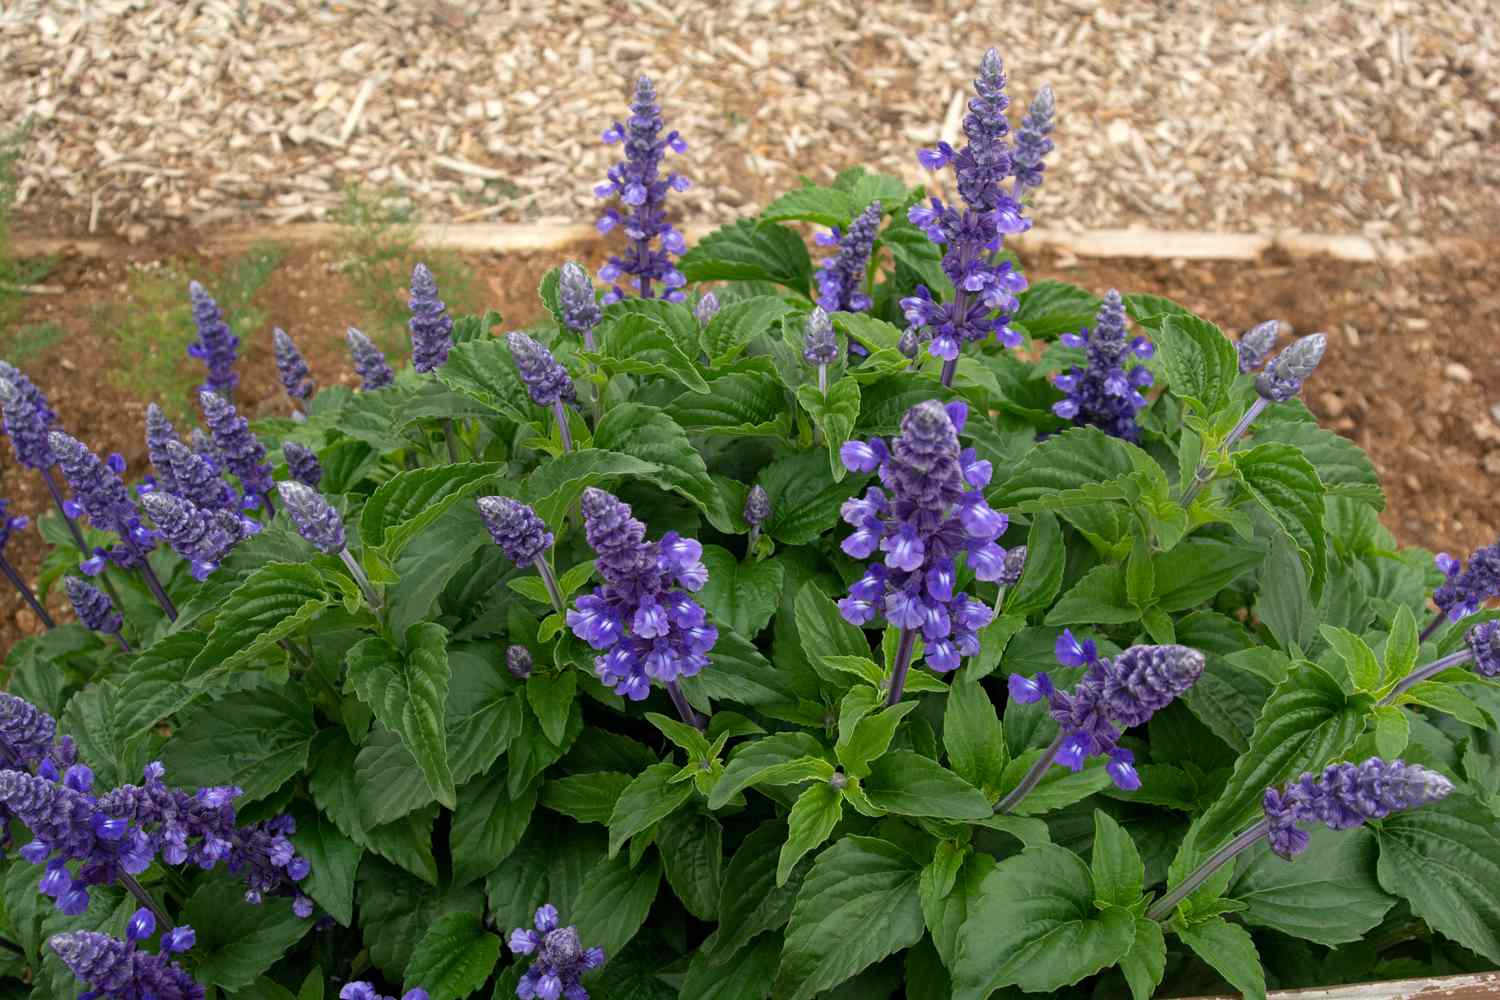 Victoria blue salvia plant with deep blue flower spikes surrounded by lance-shaped leaves next to mulch 